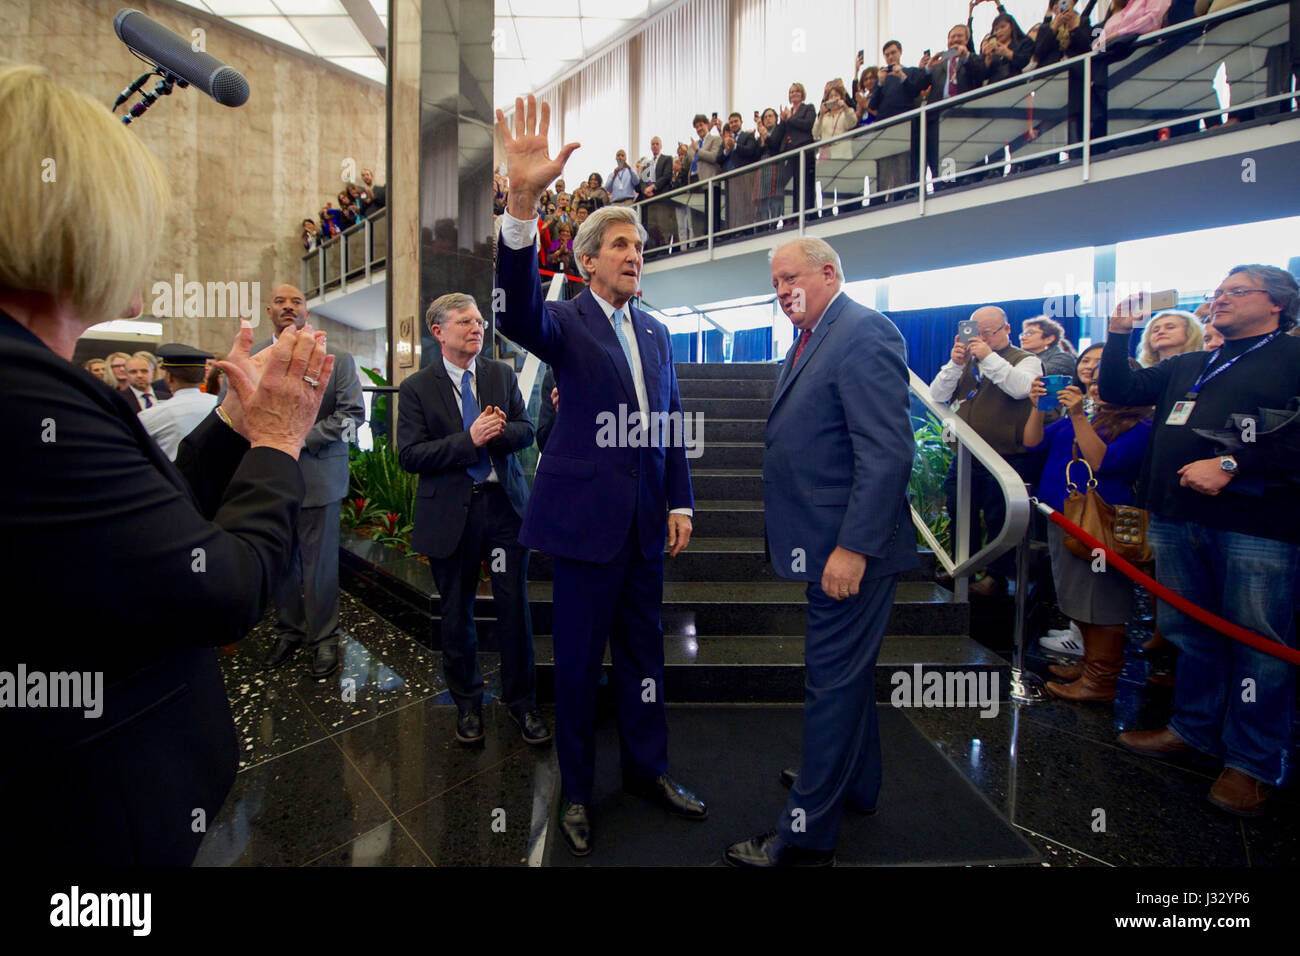 U.S. Secretary of State John Kerry waves to the crowd, as they gathered in the main lobby of the Department's Harry S. Truman building, before delivering farewell remarks on January 19, 2017. Stock Photo